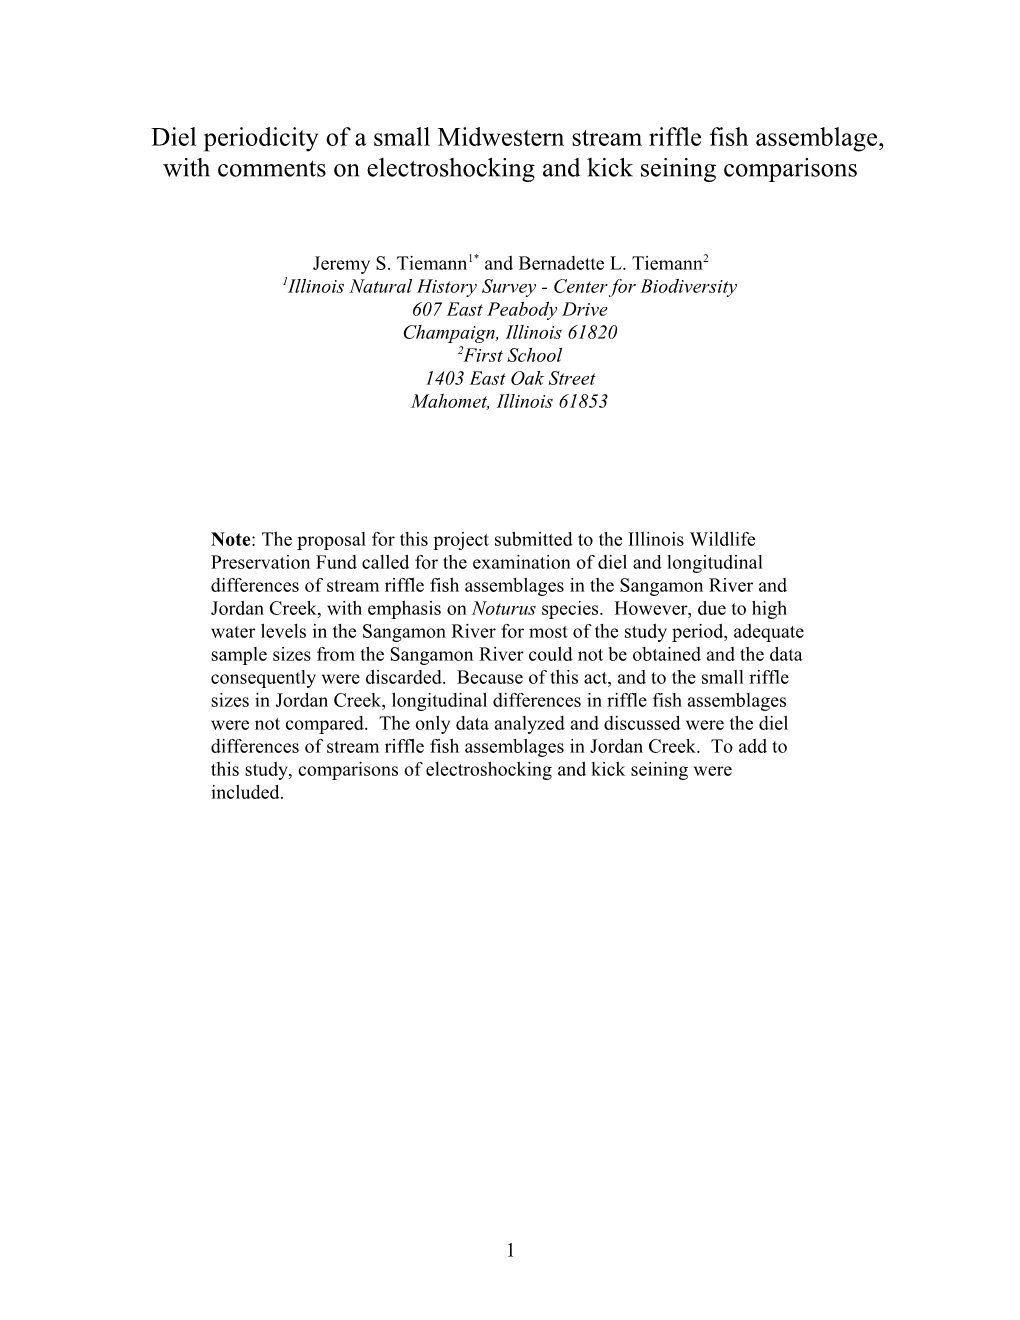 Comparisons of Electroshocking and Seining to Evaluate Diel Differences